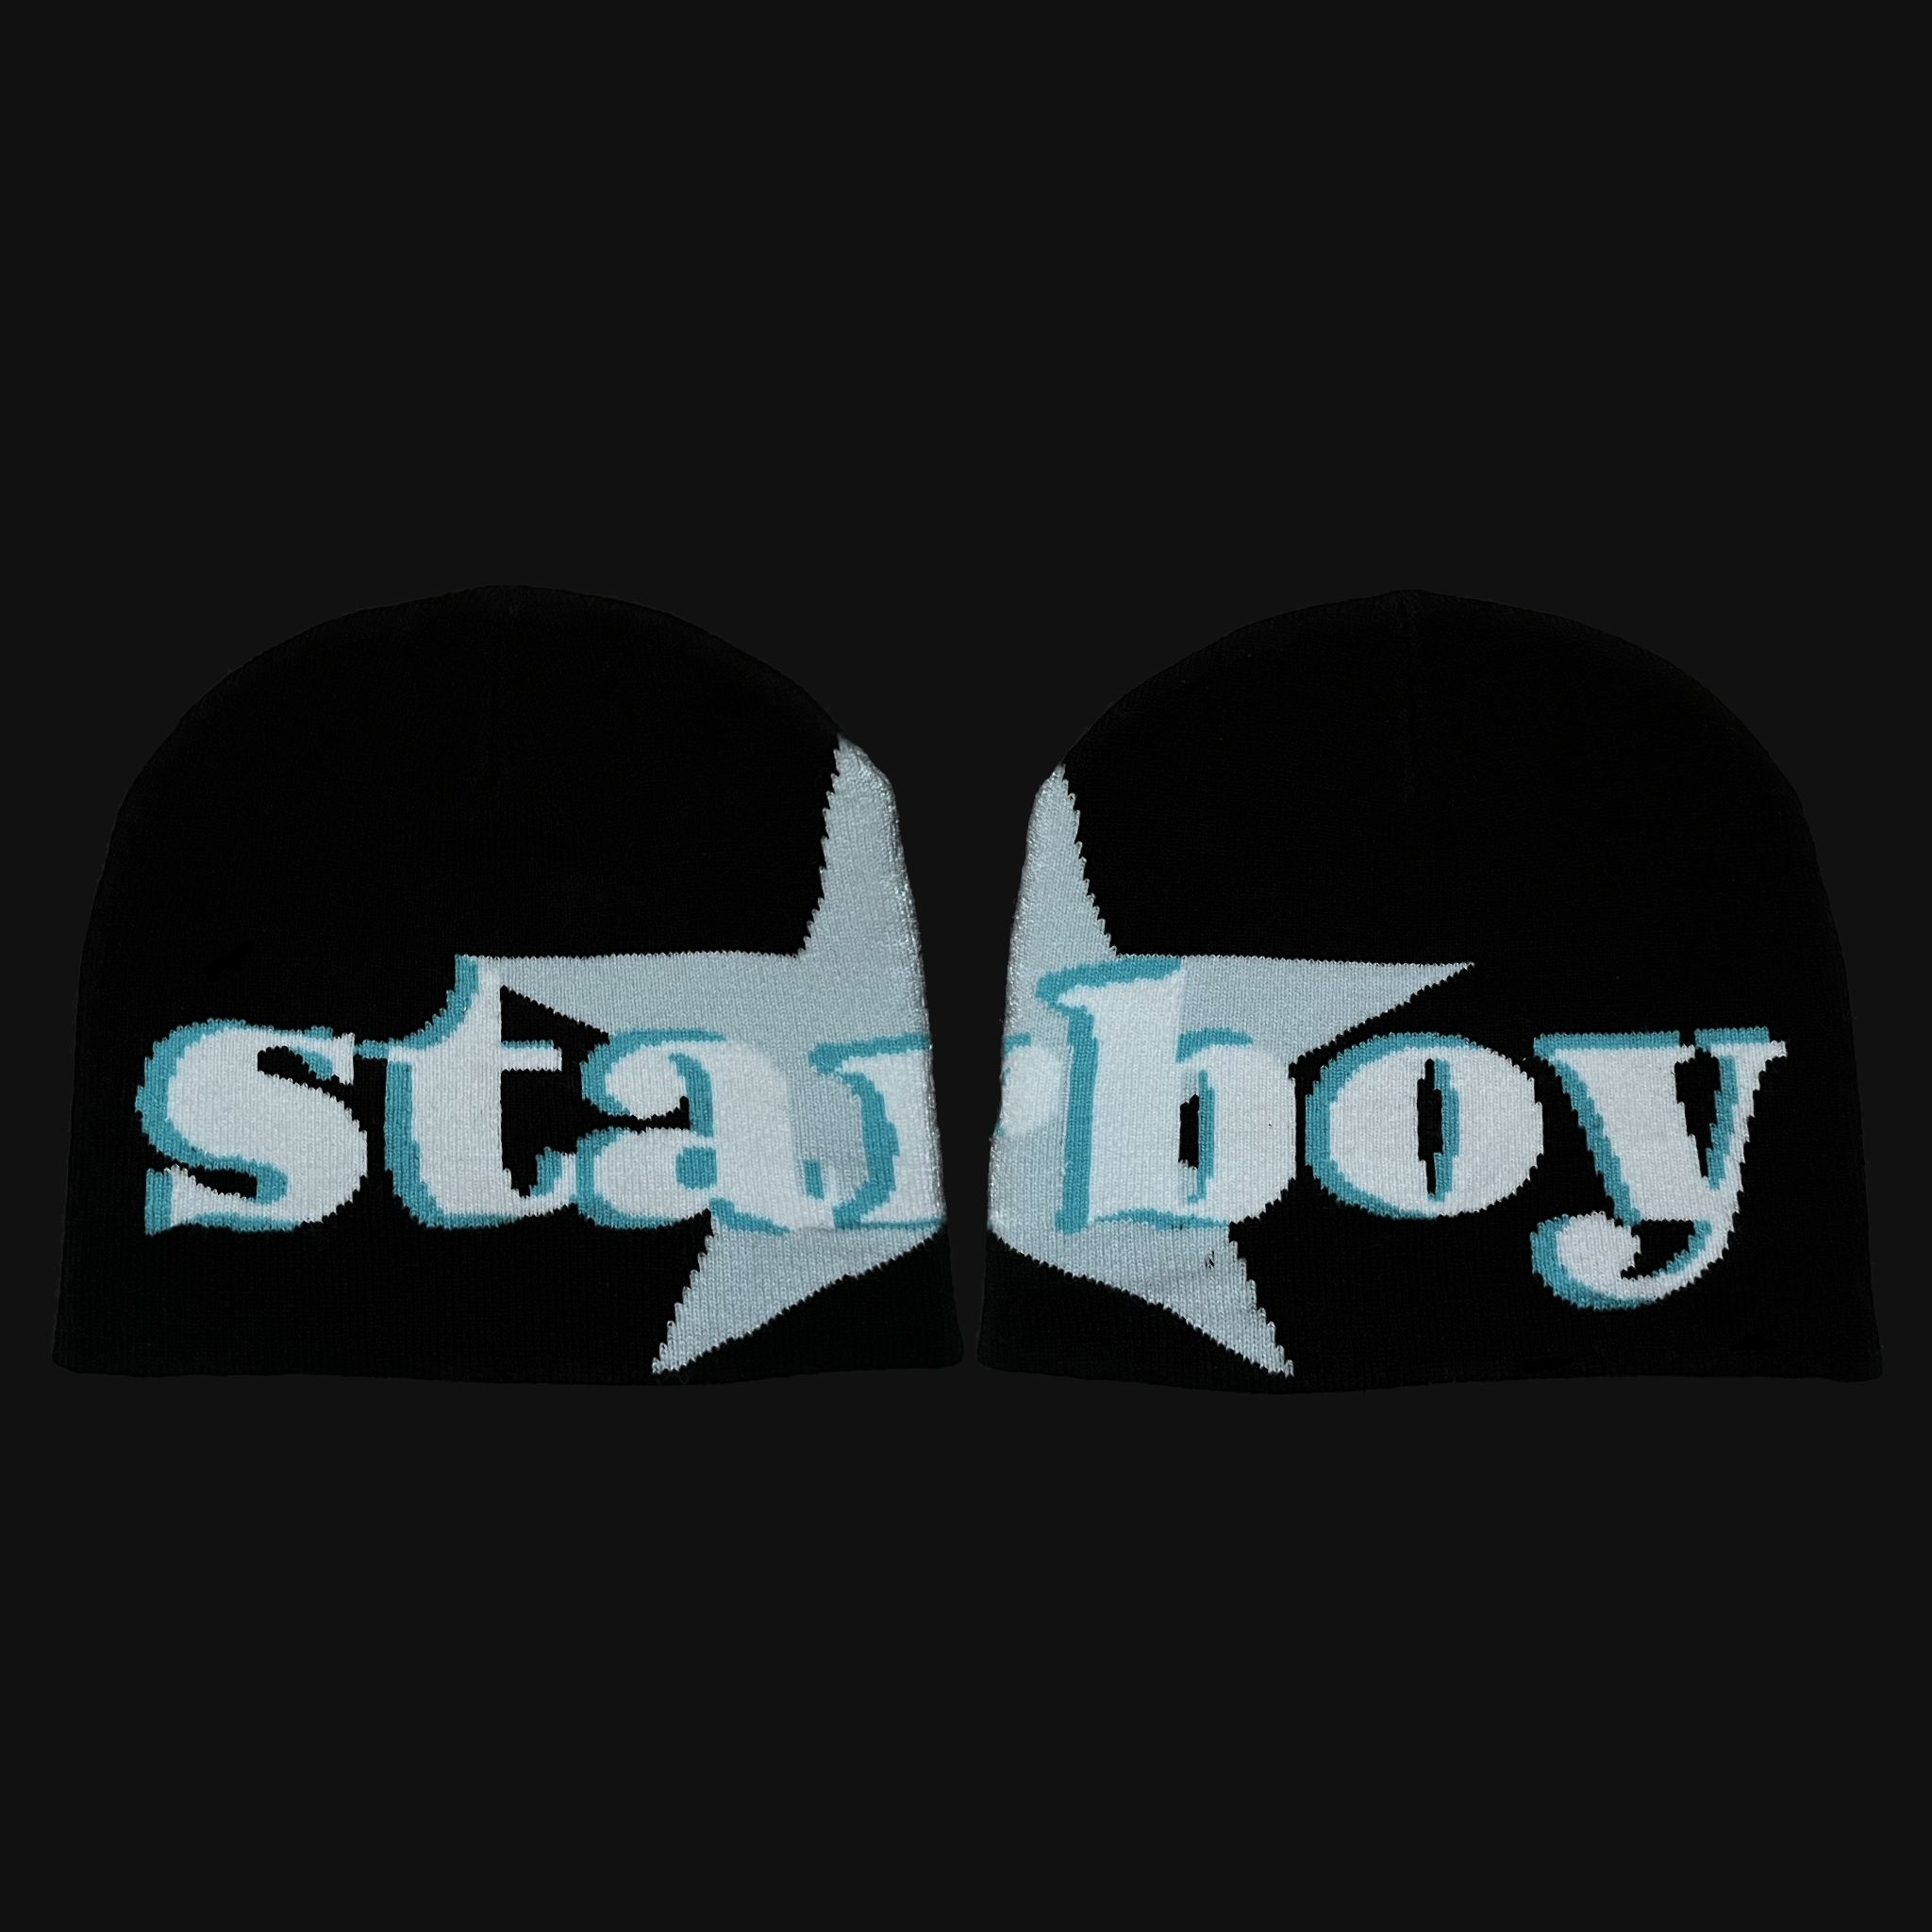 Starboy a Musical (Original Theater Soundtrack) Official TikTok Music |  album by RAY SHELL-Chris Van Cleave - Listening To All 5 Musics On TikTok  Music